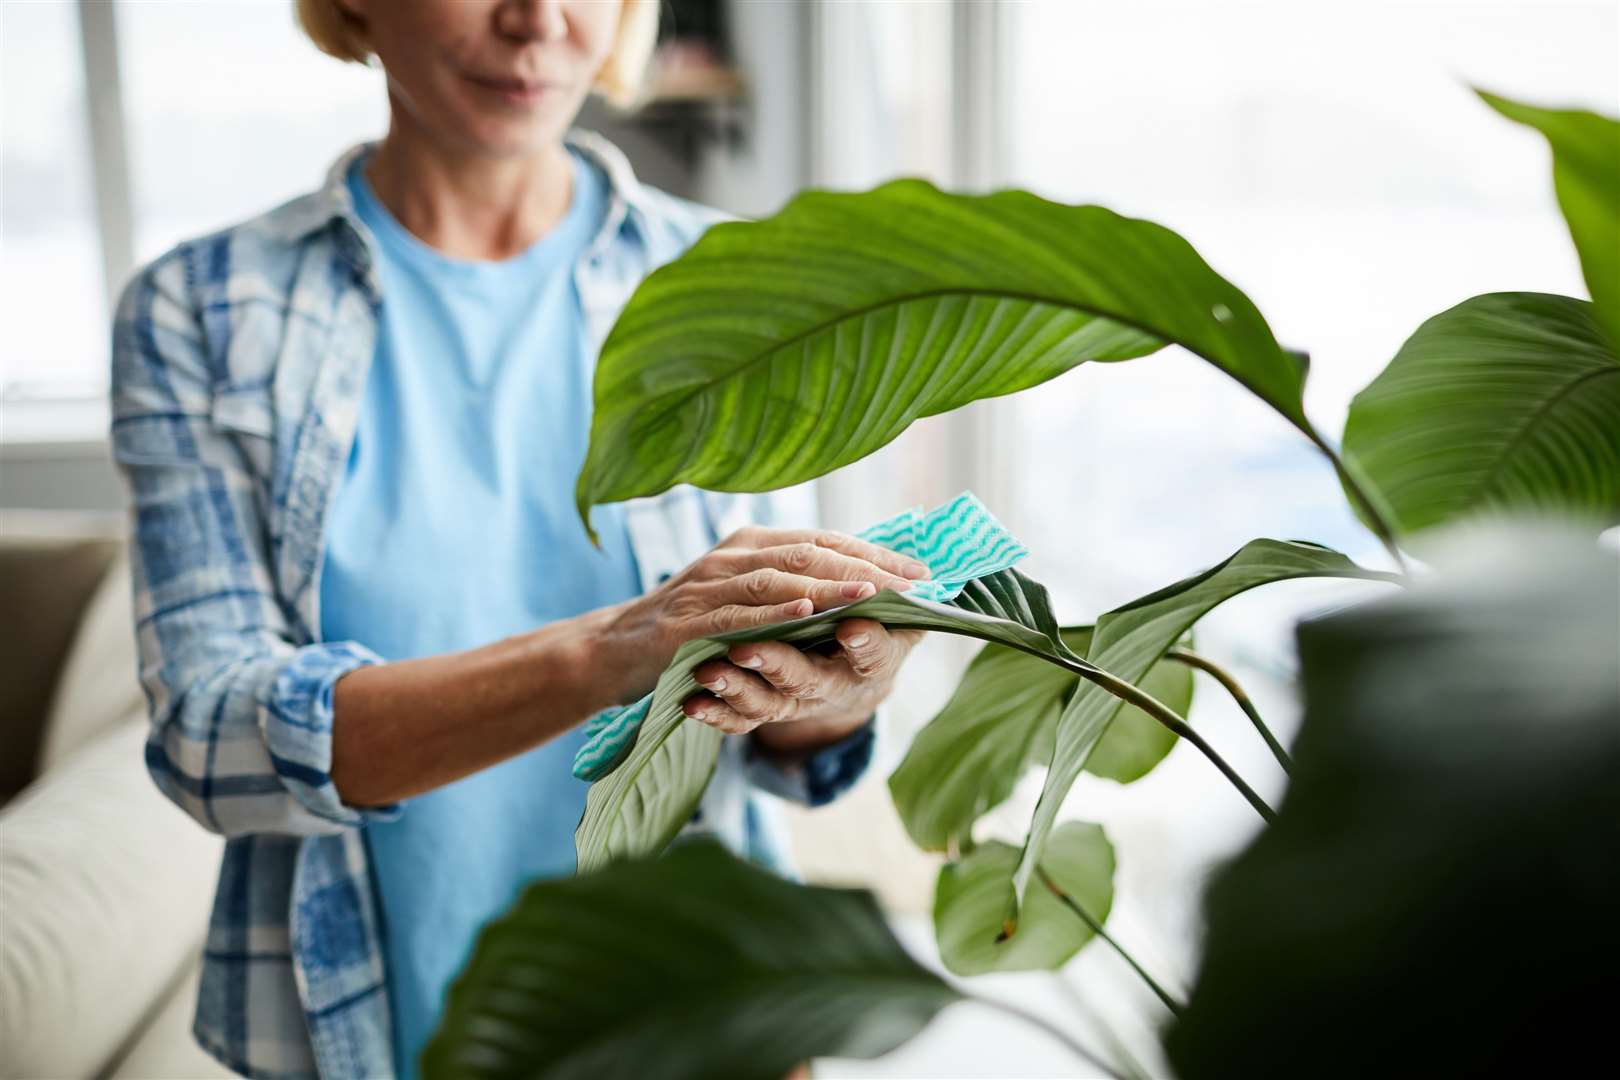 Wipe the leaves of houseplants to aid good health. Picture: iStock/PA